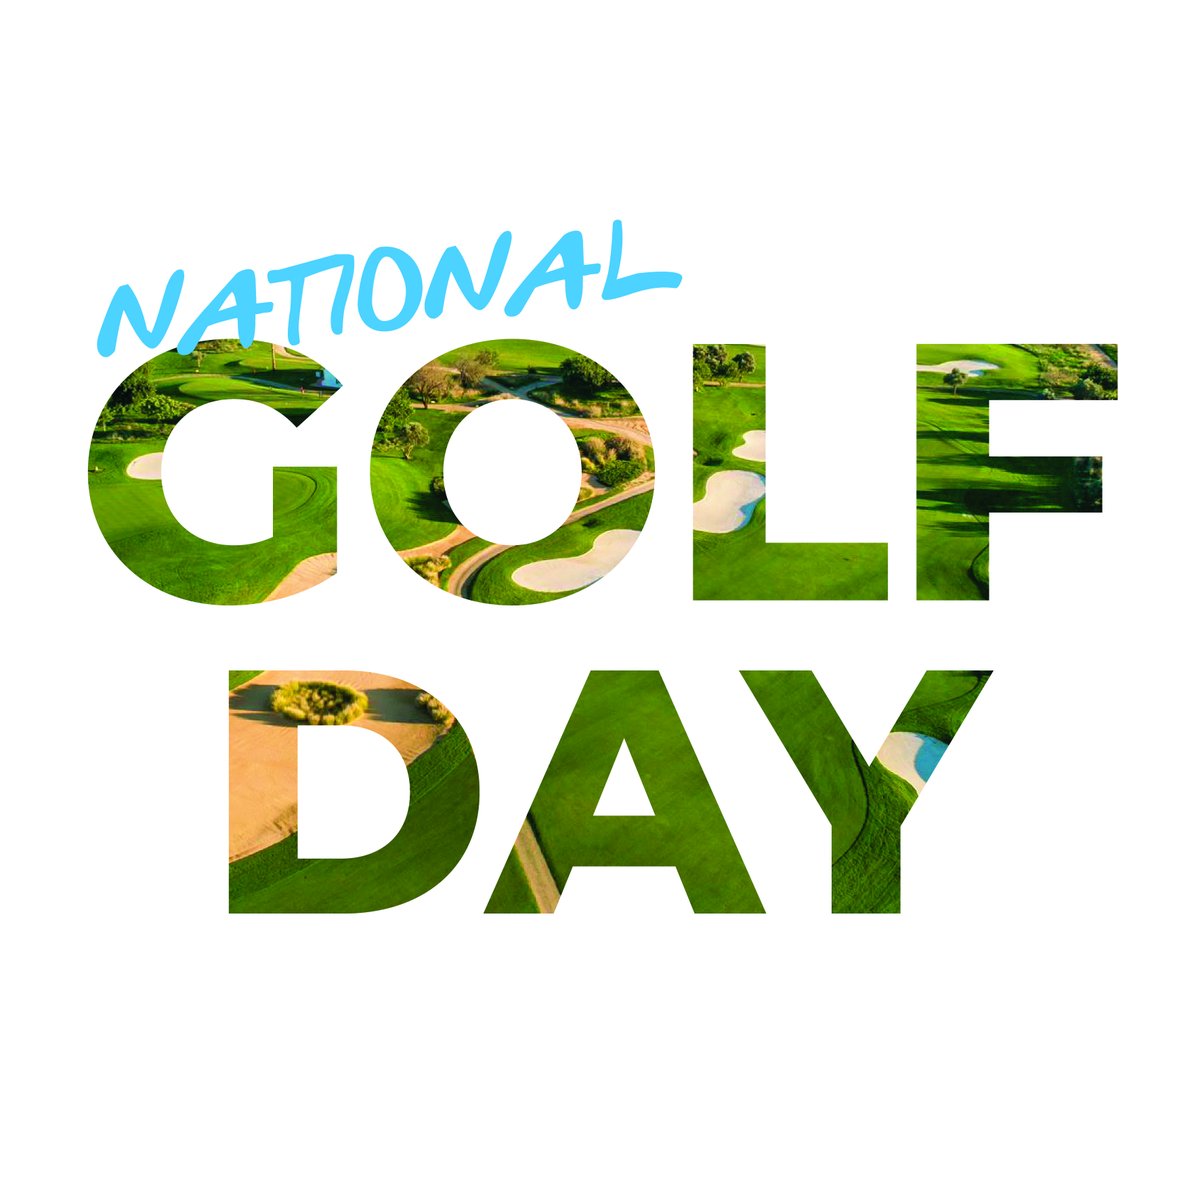 Happy National Golf Day! Here’s to swinging, swearing, slicing & smiling 🏌️⛳️

#nationalgolfday #golflife